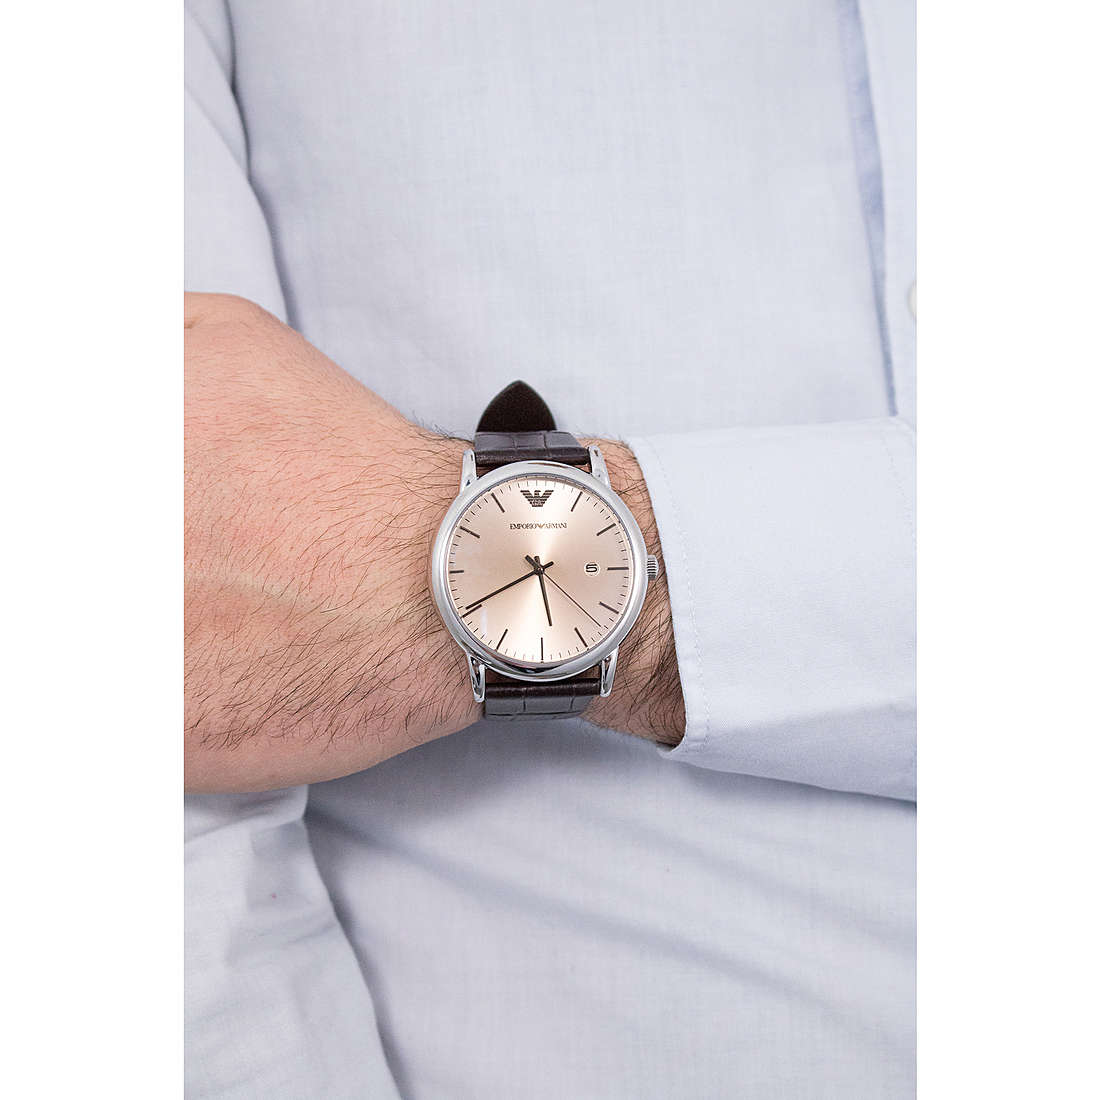 Emporio Armani only time man AR11096 wearing